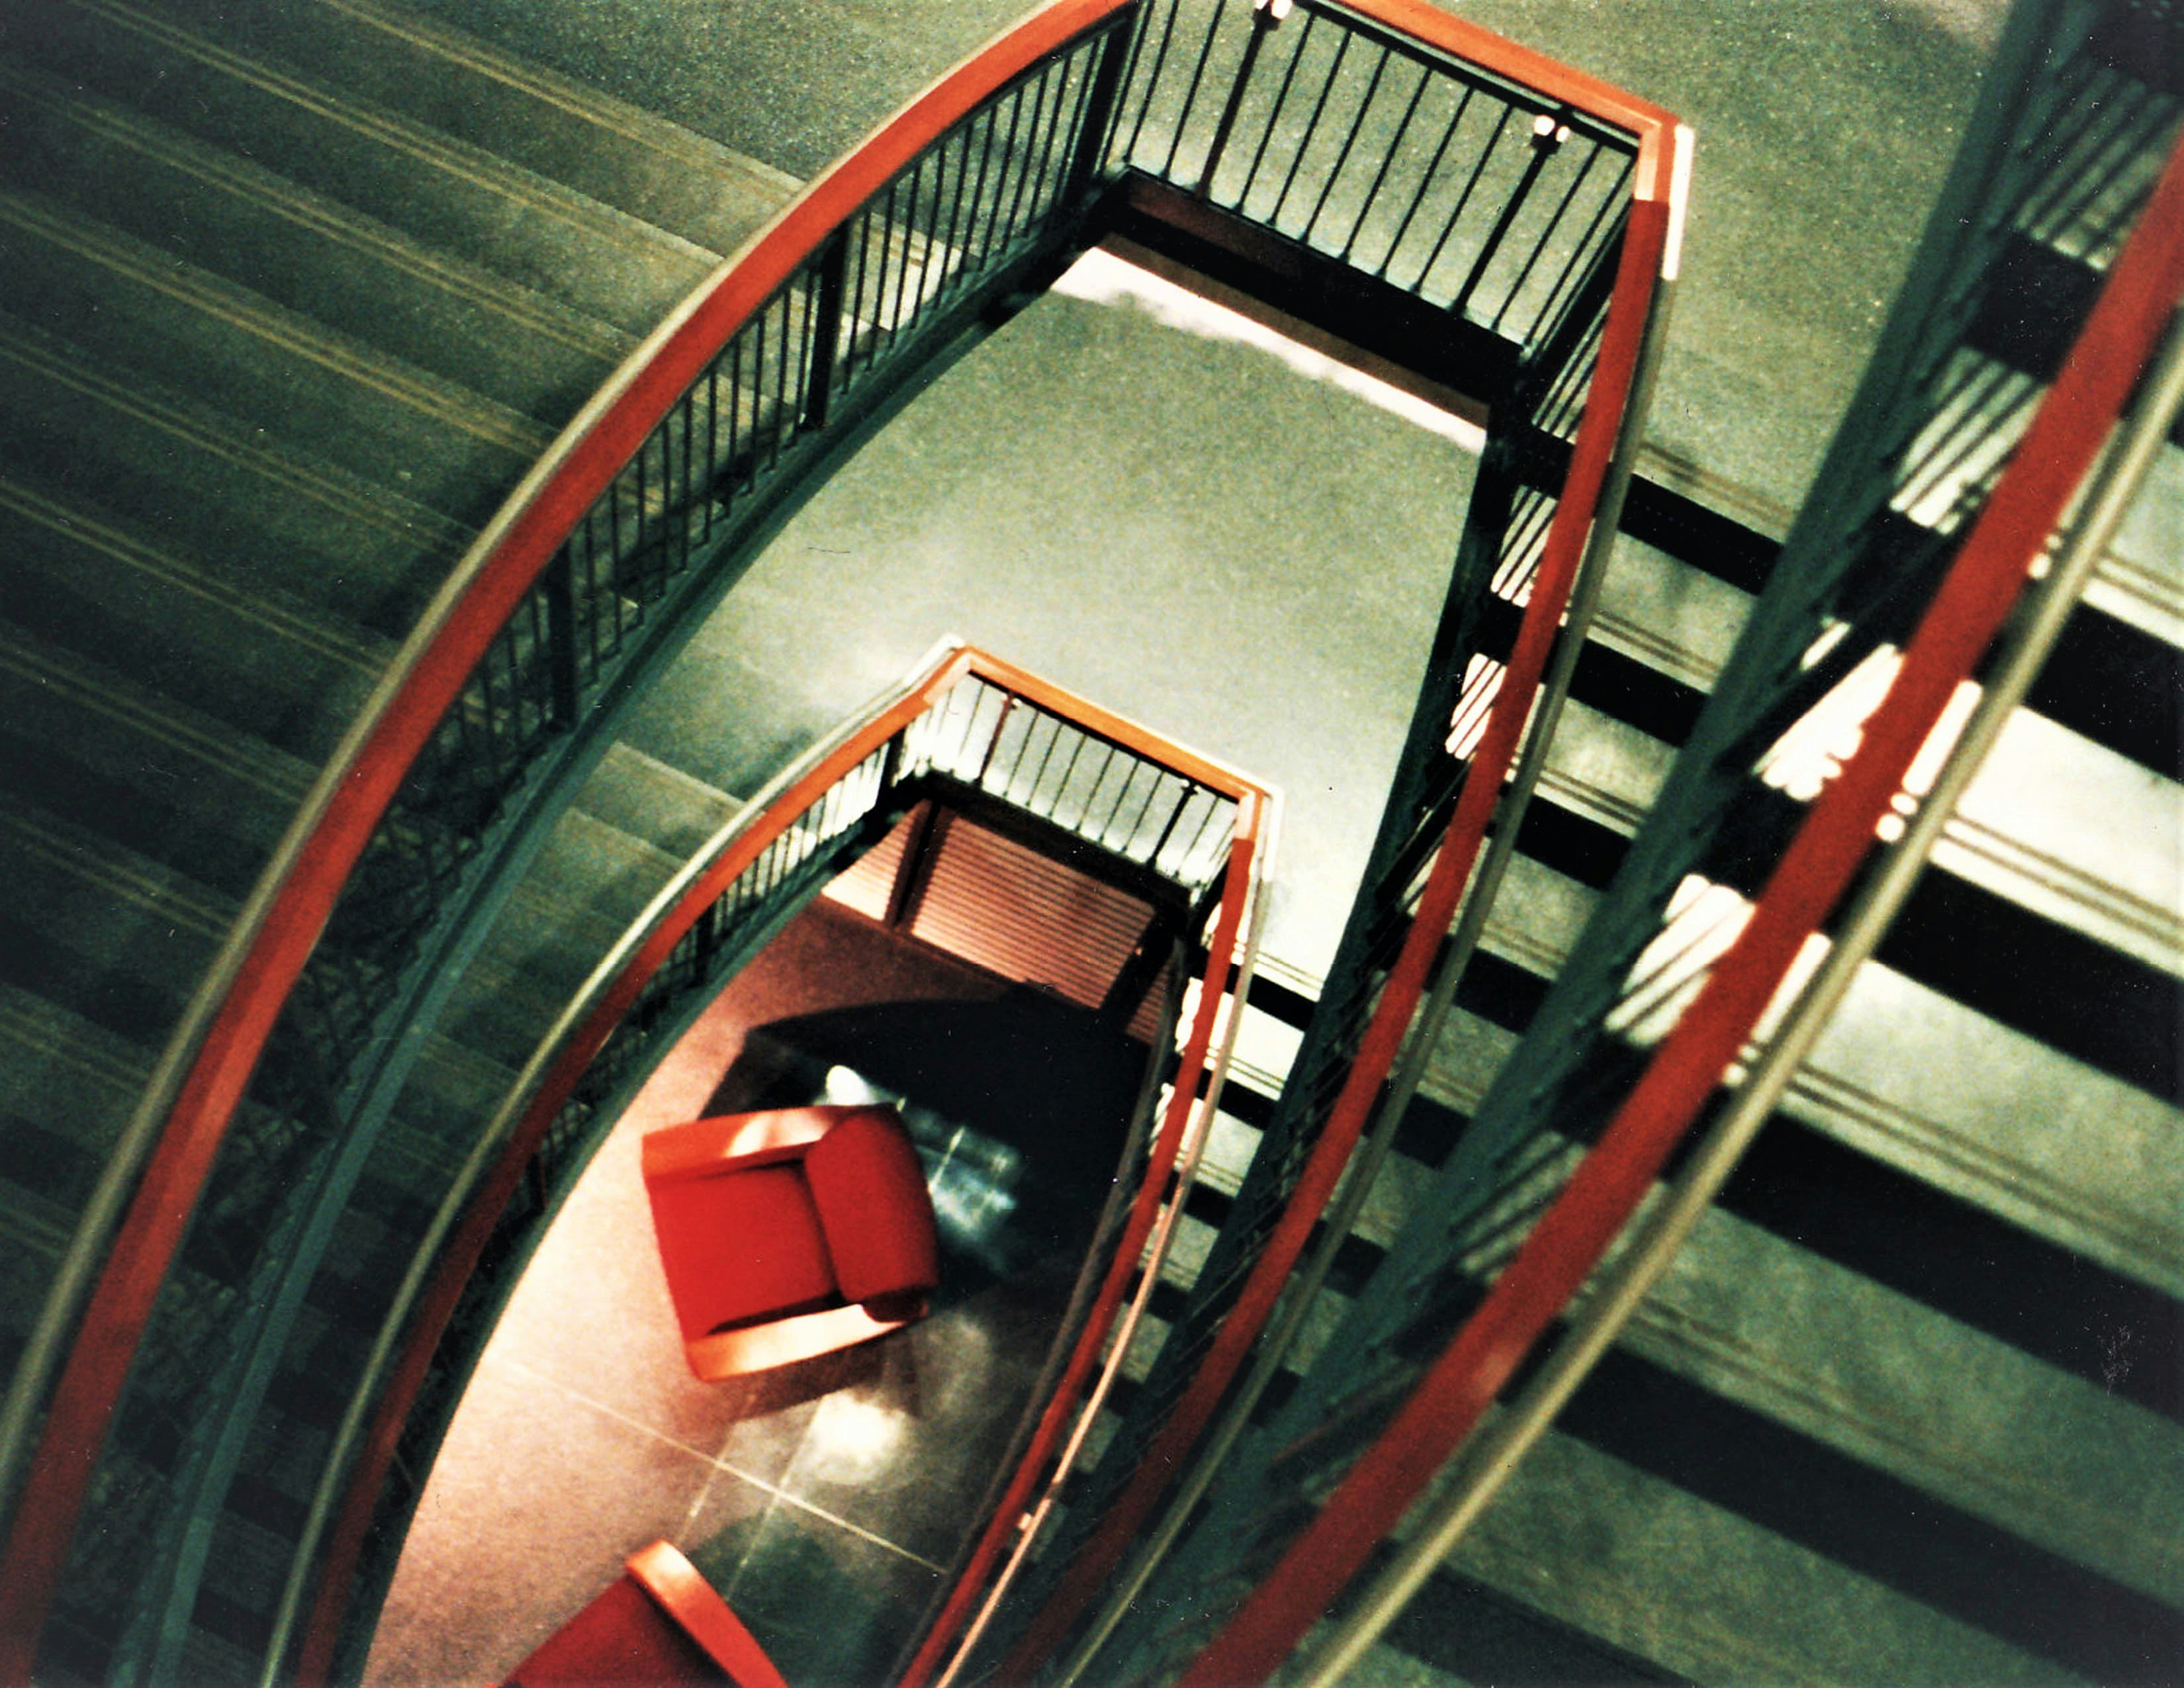 Staircase view (top down) of Bracy Science Hall at Mount Union College (now University of Mount Union) in Alliance, OH